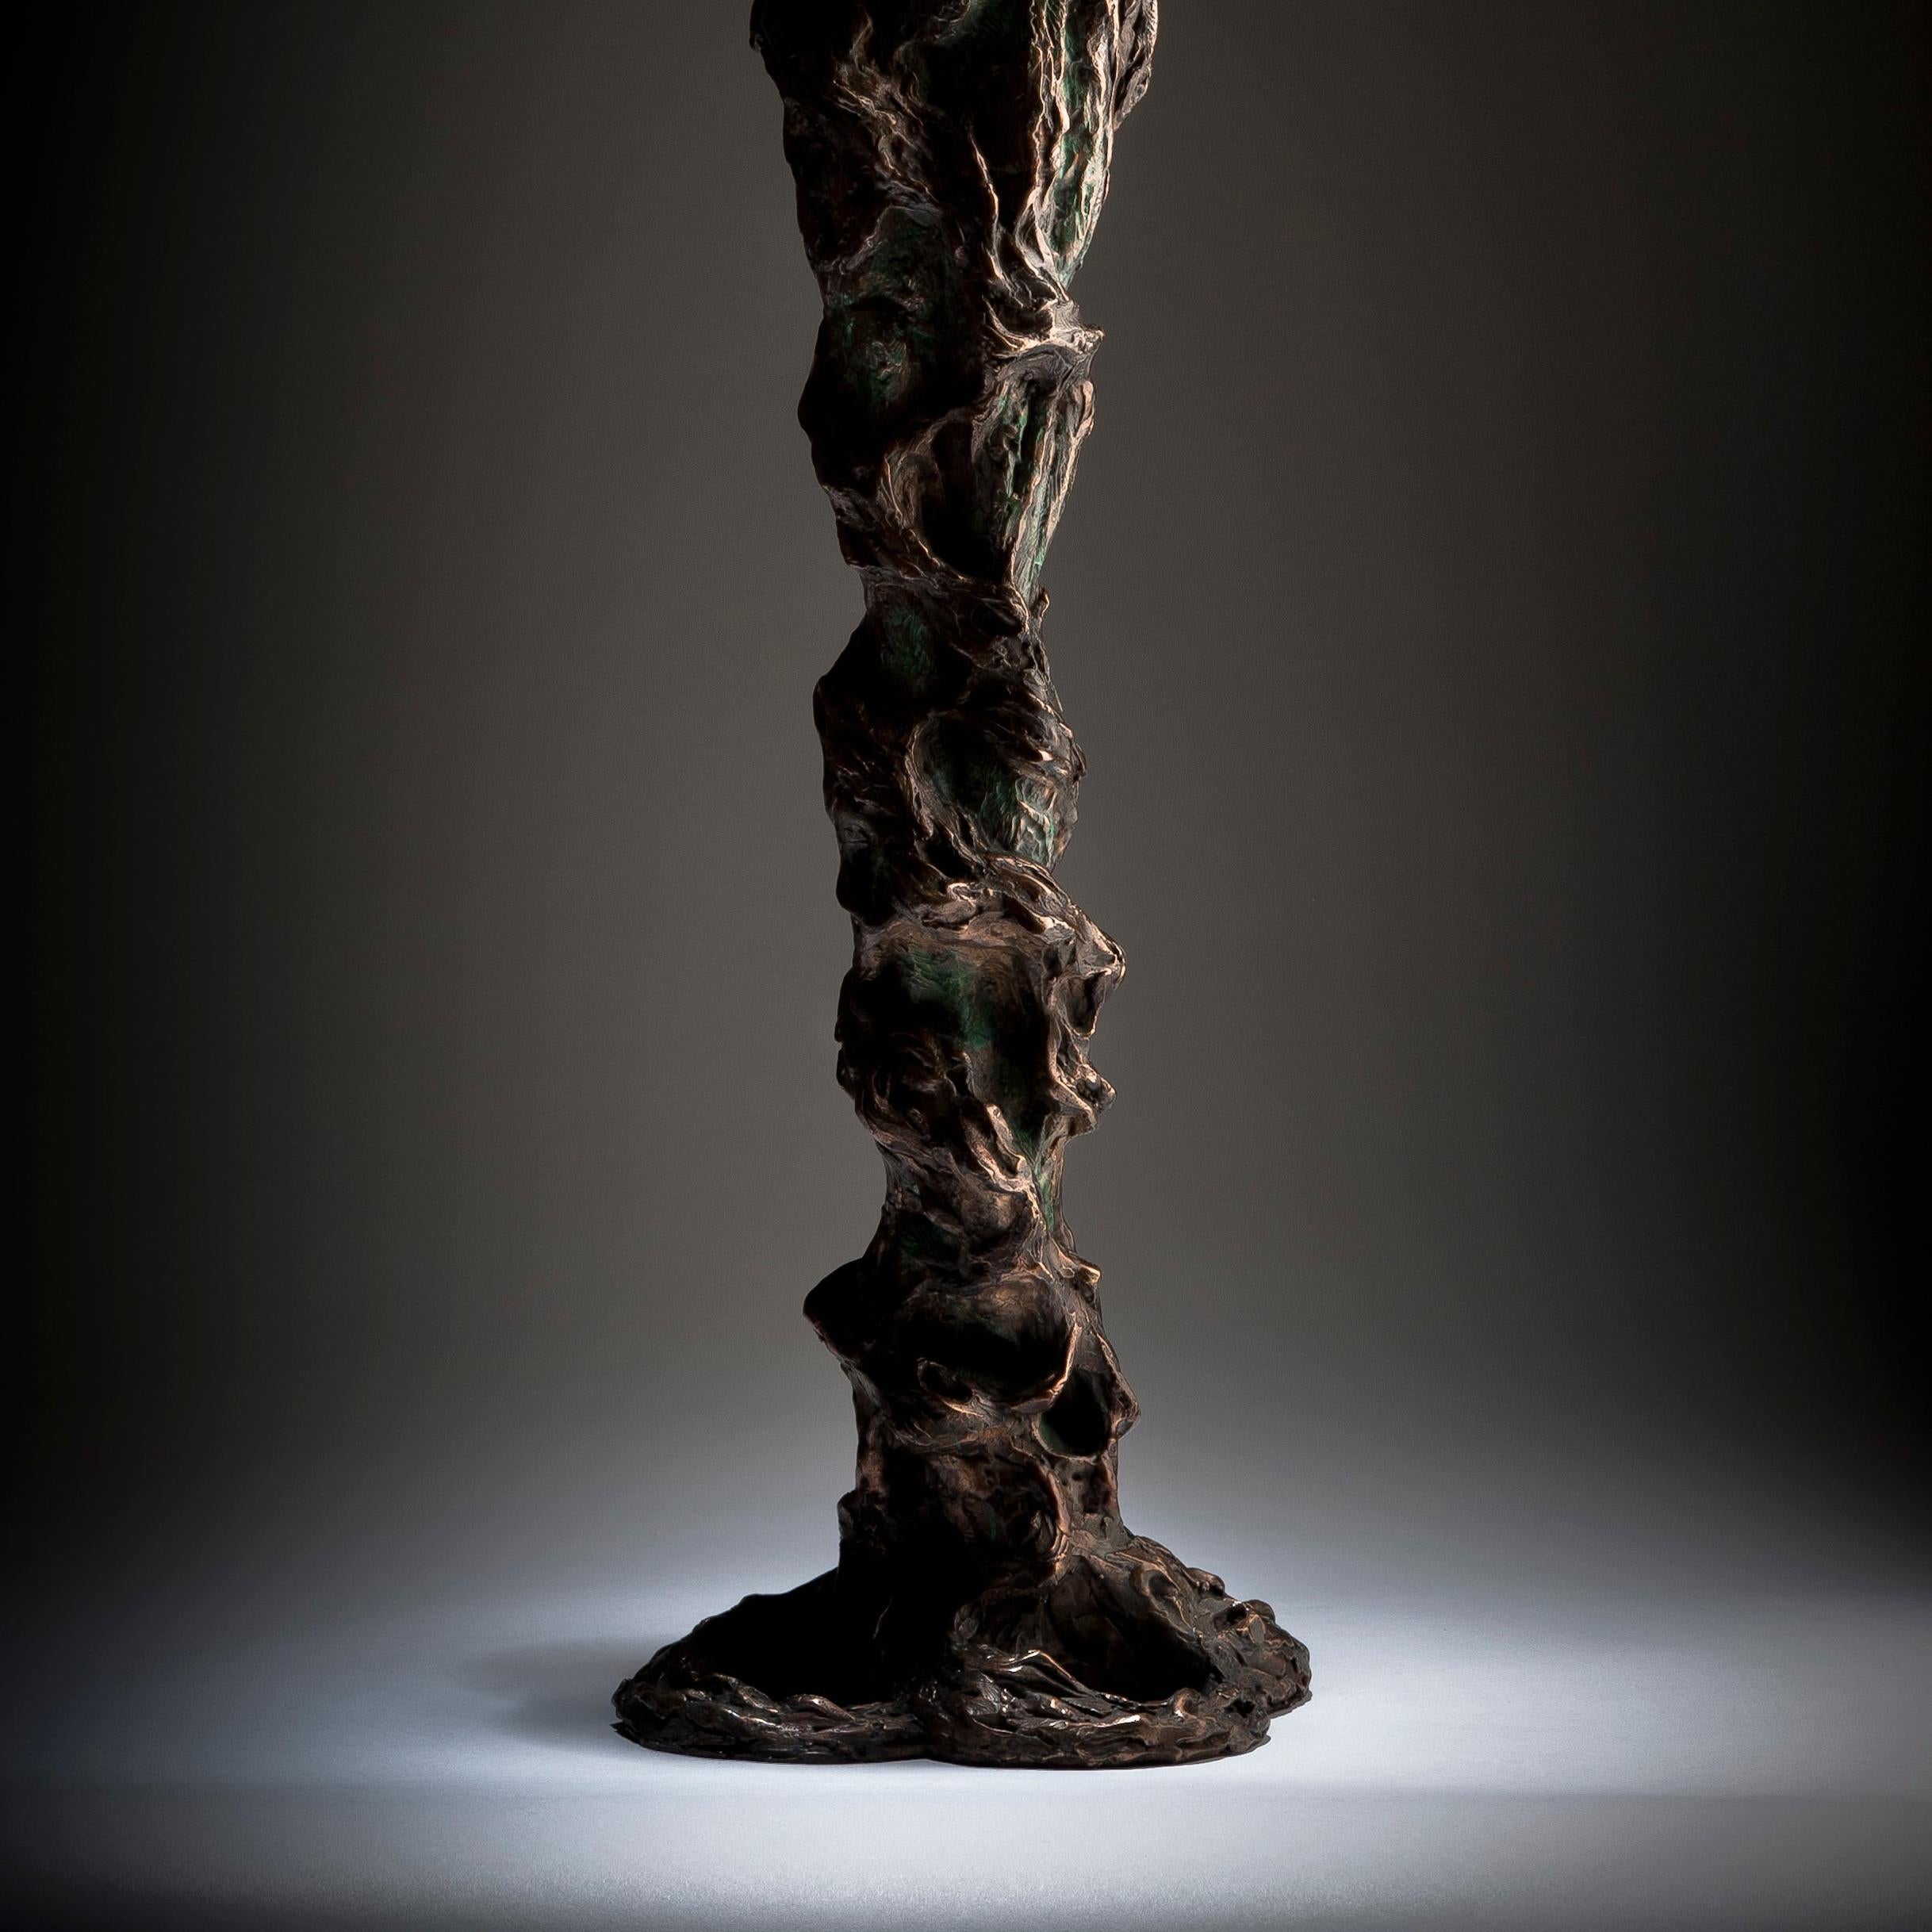 Ian Edwards - The Root Within - Original Signed Bronze Sculpure
Dimensions: 220 x 70 x 70 cm 
Edition of 6

Edwards’ practice expresses the power and determination of human endeavour. He
draws inspiration from natural forces, with his powerful